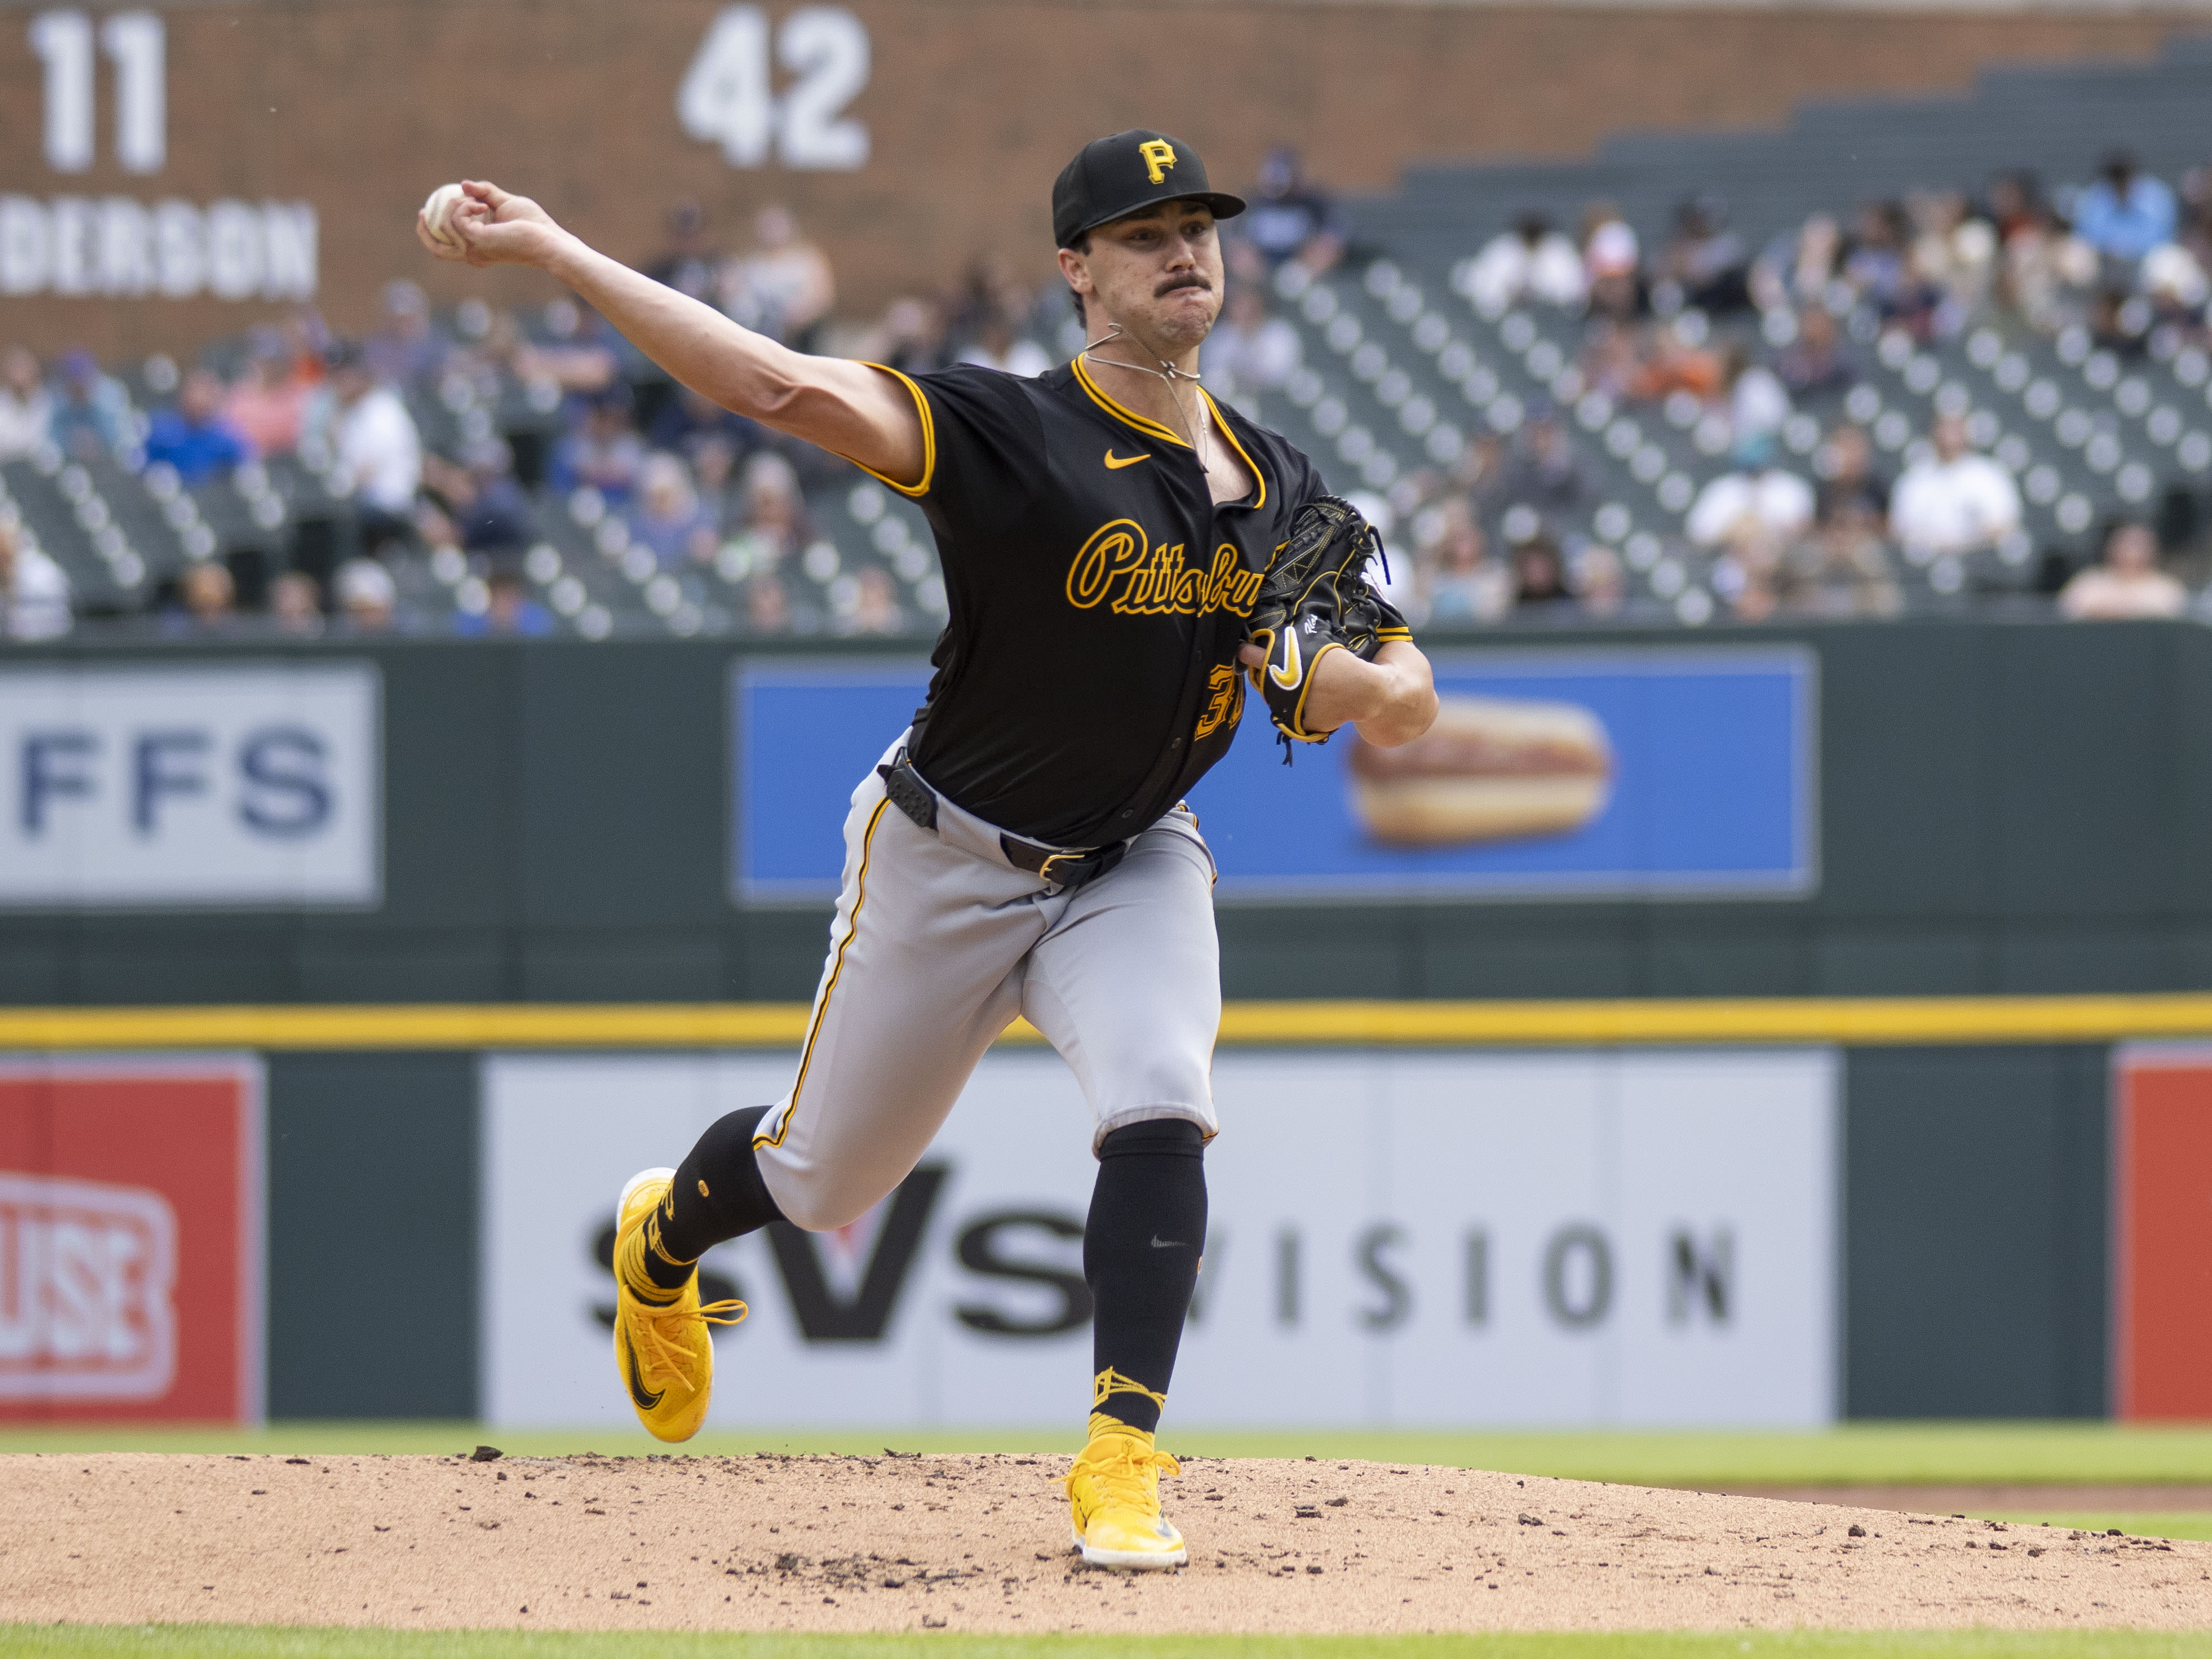 Paul Skenes' sensational MLB start continues with 9 strikeouts in Pirates win over Tigers